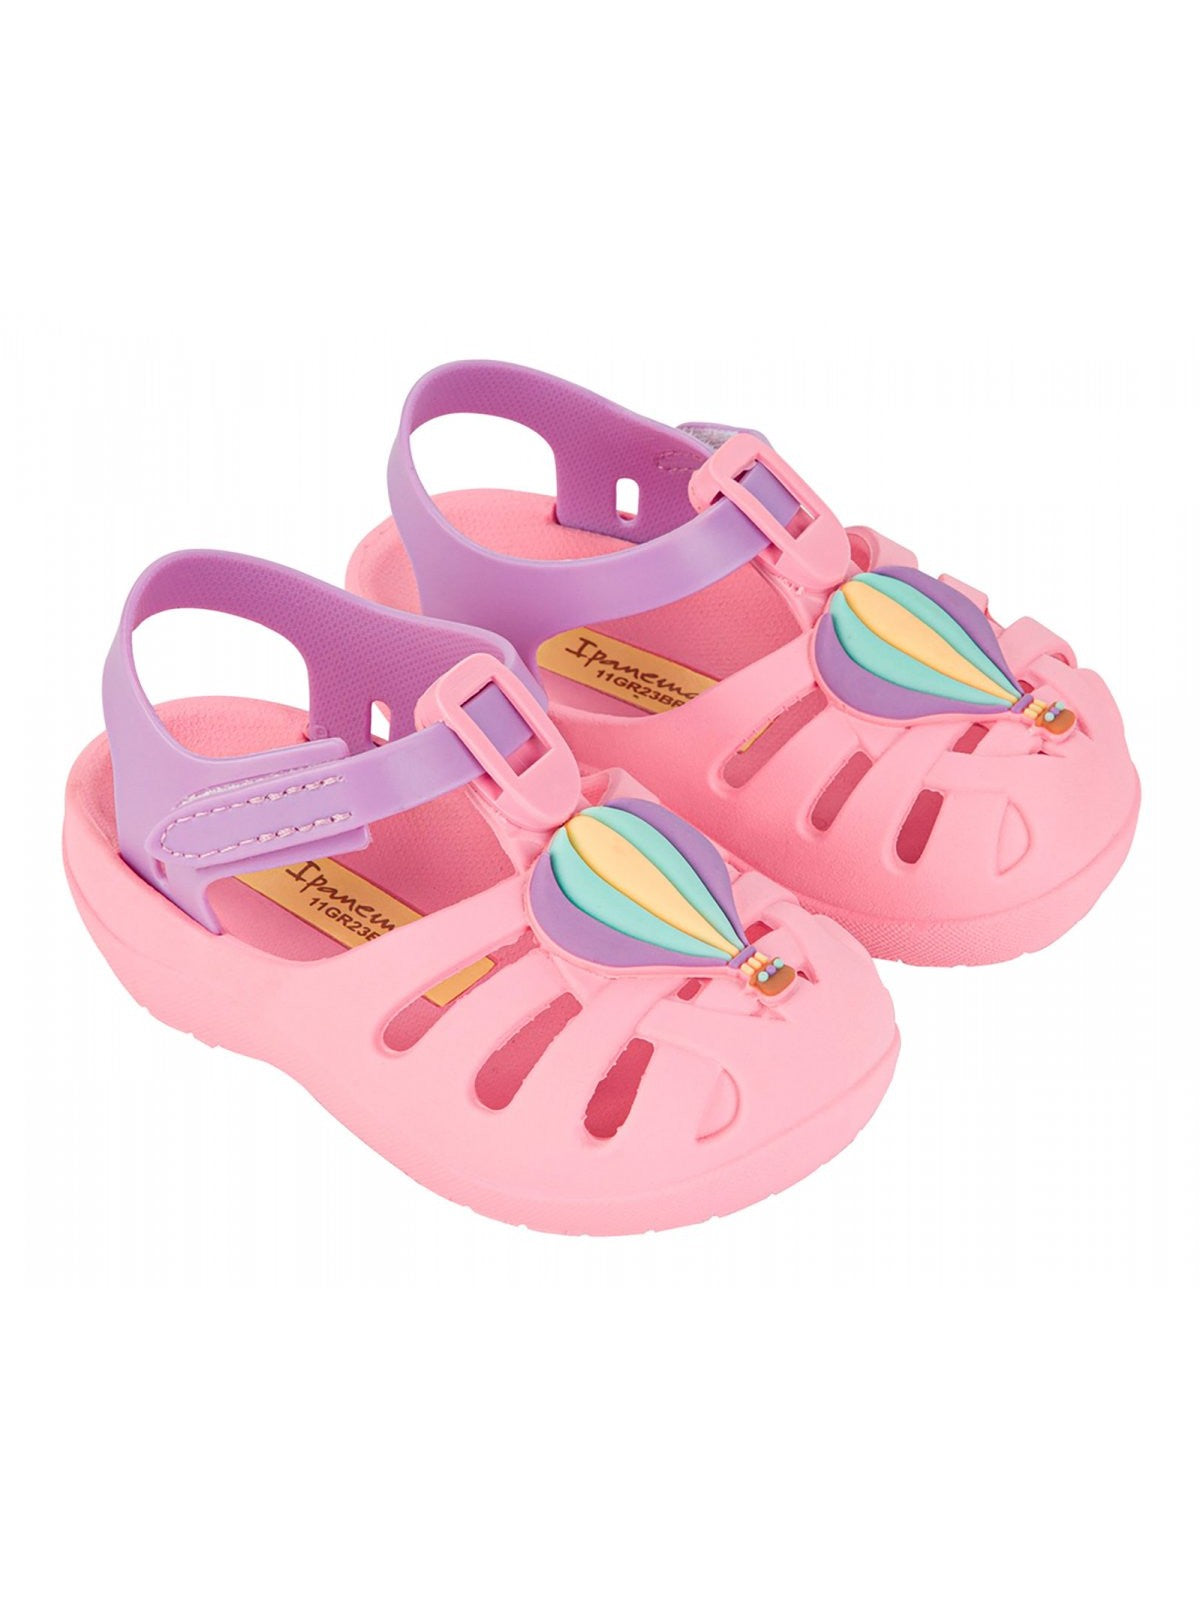 IPANEMA Sandales pour filles et Ipanema Summer Xii Baby IP.83485 AR576 Pink